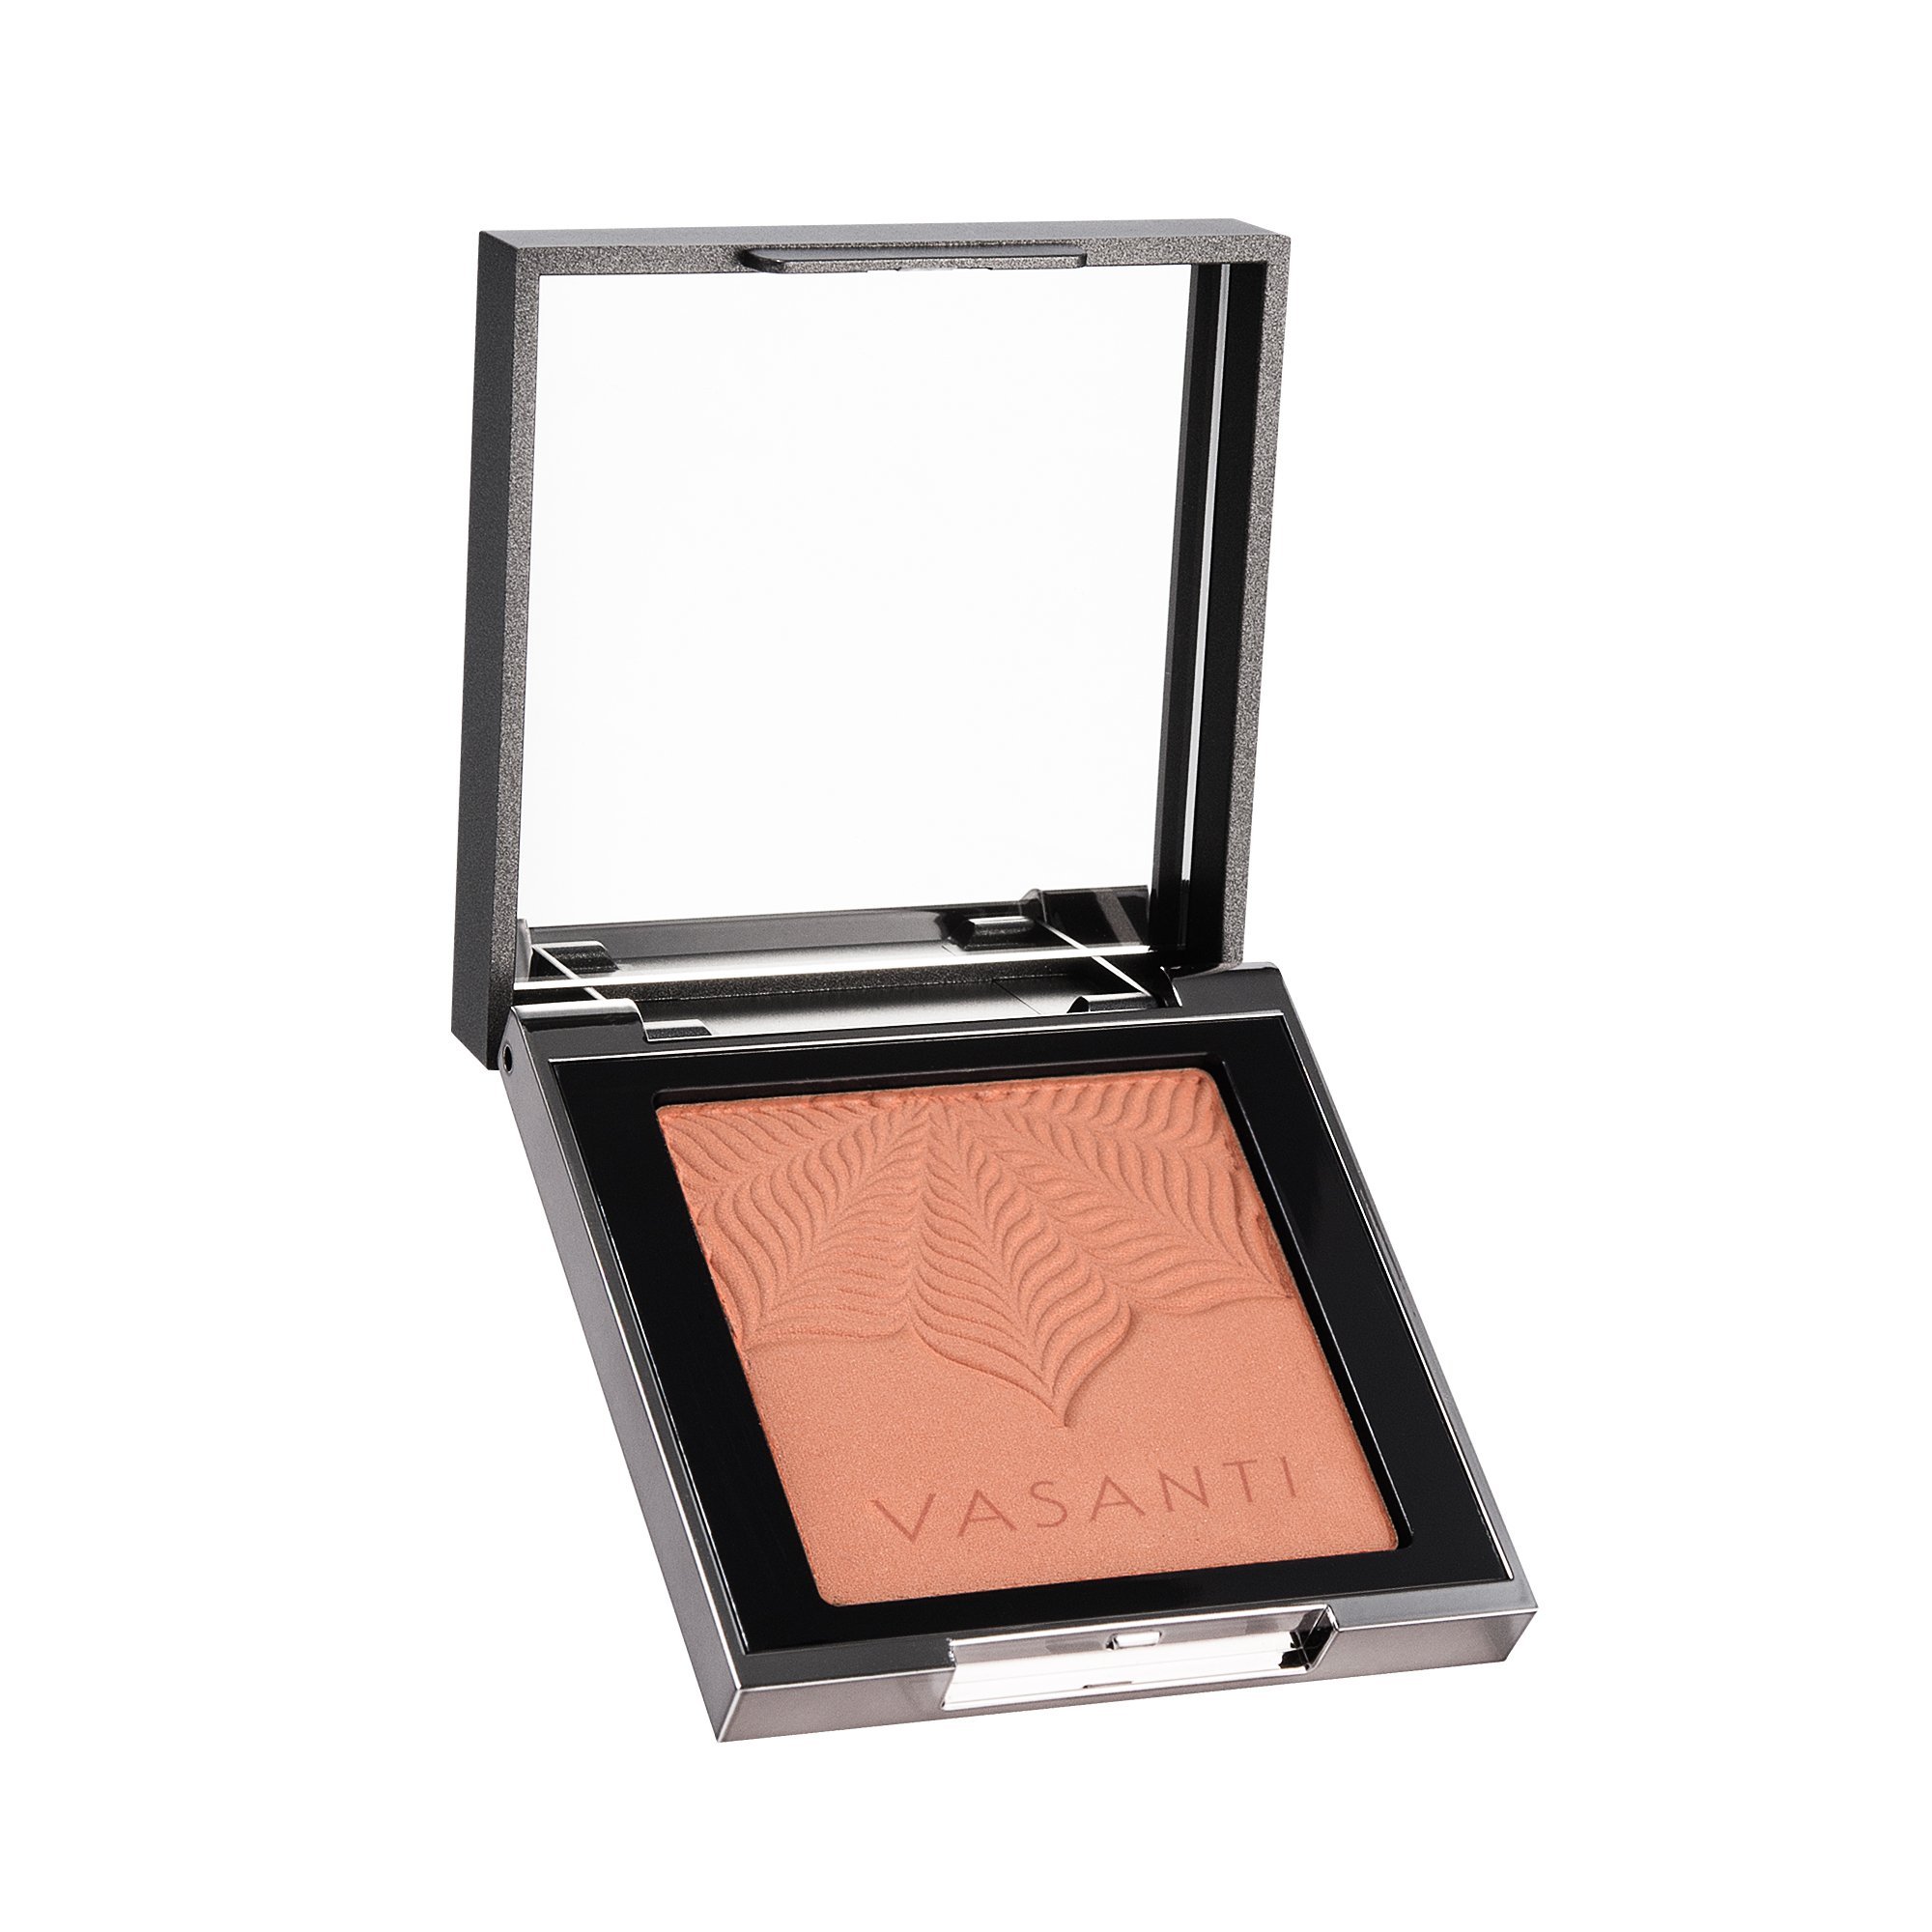 VASANTI Mineral Bronzer - Talc-Free Bronzer - Vegan Friendly and Paraben Free Face Makeup - Nourish and Boost Your Complexion with Our Anti-Aging Bronzer